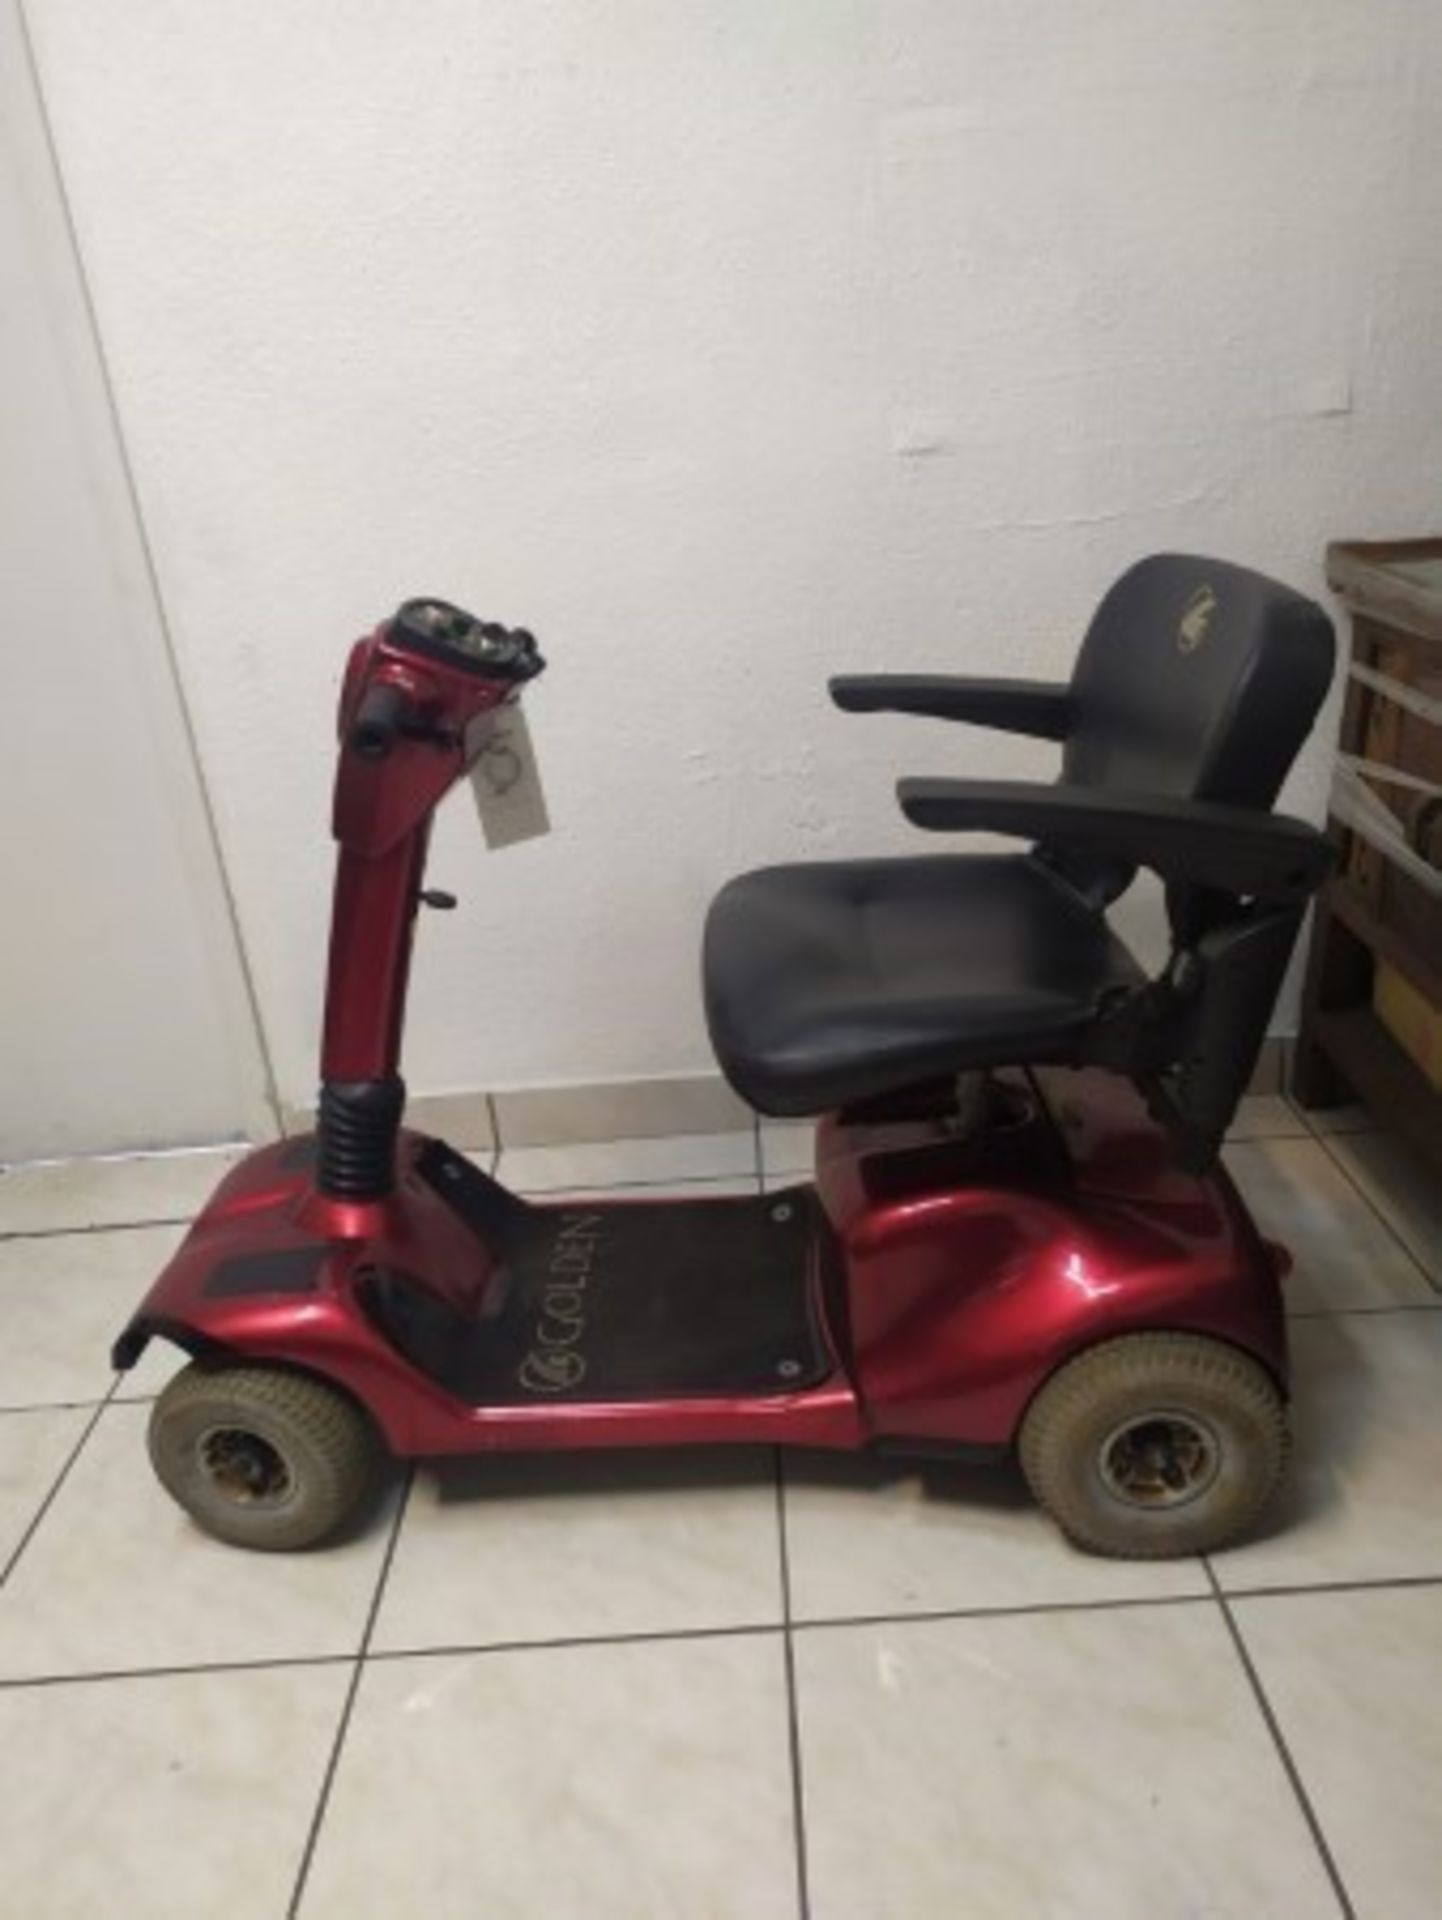 2005 GOLDEN COMPANION GC421 4-WHEEL SCOOTER WITH BUILT-IN CHARGER & BATTERY - RED - 400LB CAPACITY - - Image 2 of 5